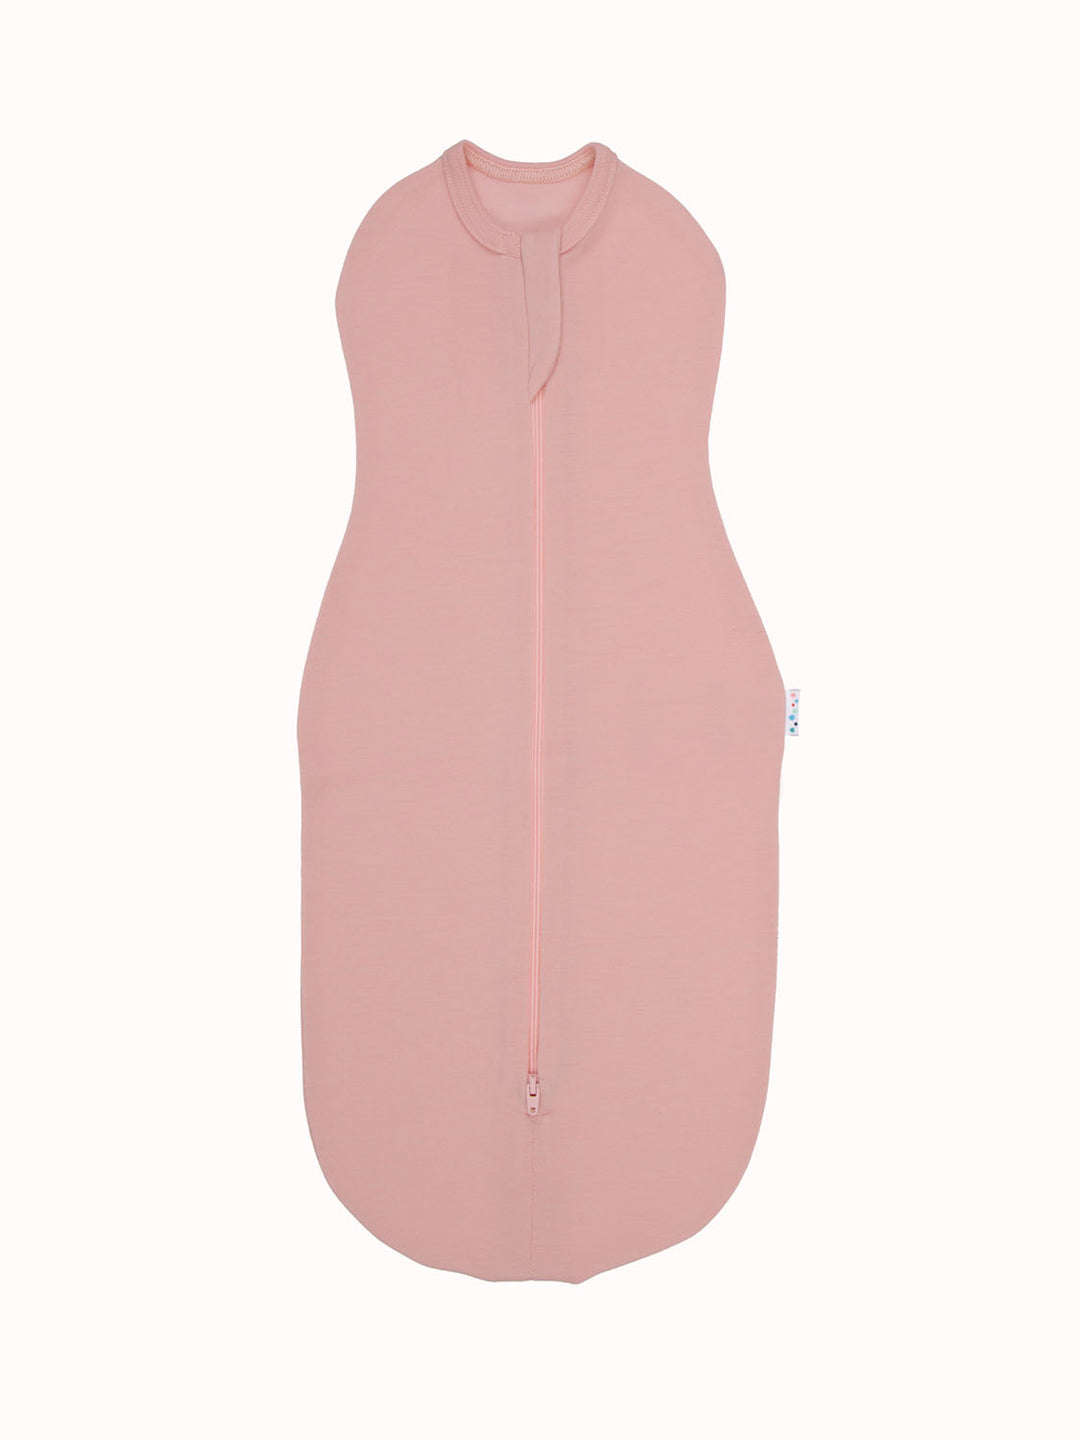 factory second merino swaddle pink